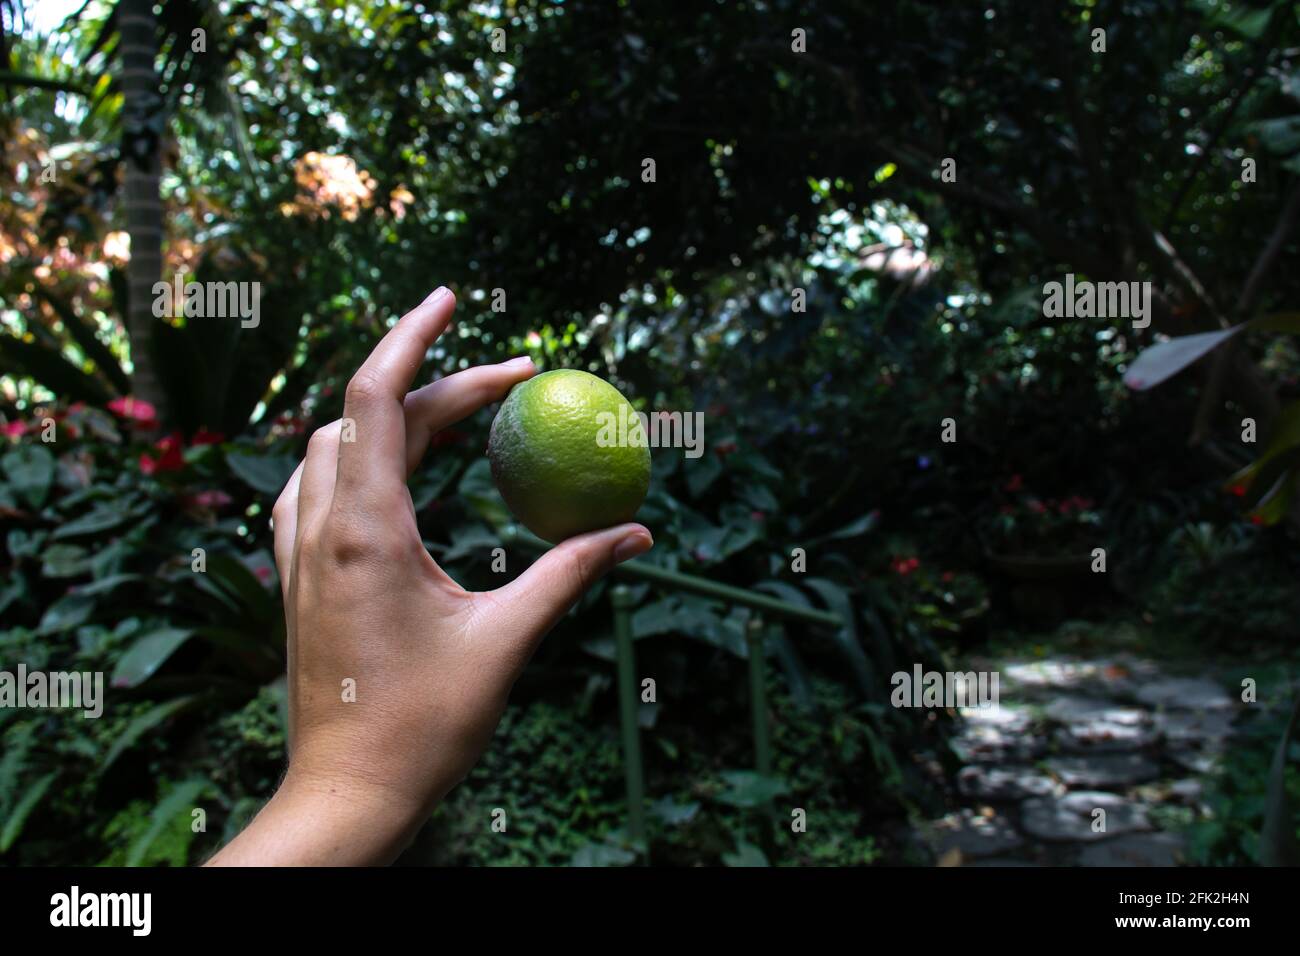 Woman's hand holding a small green lime in a Caribbean flower forest - green palm jungle. Pinching between fingers in air, concrete path in back. Stock Photo